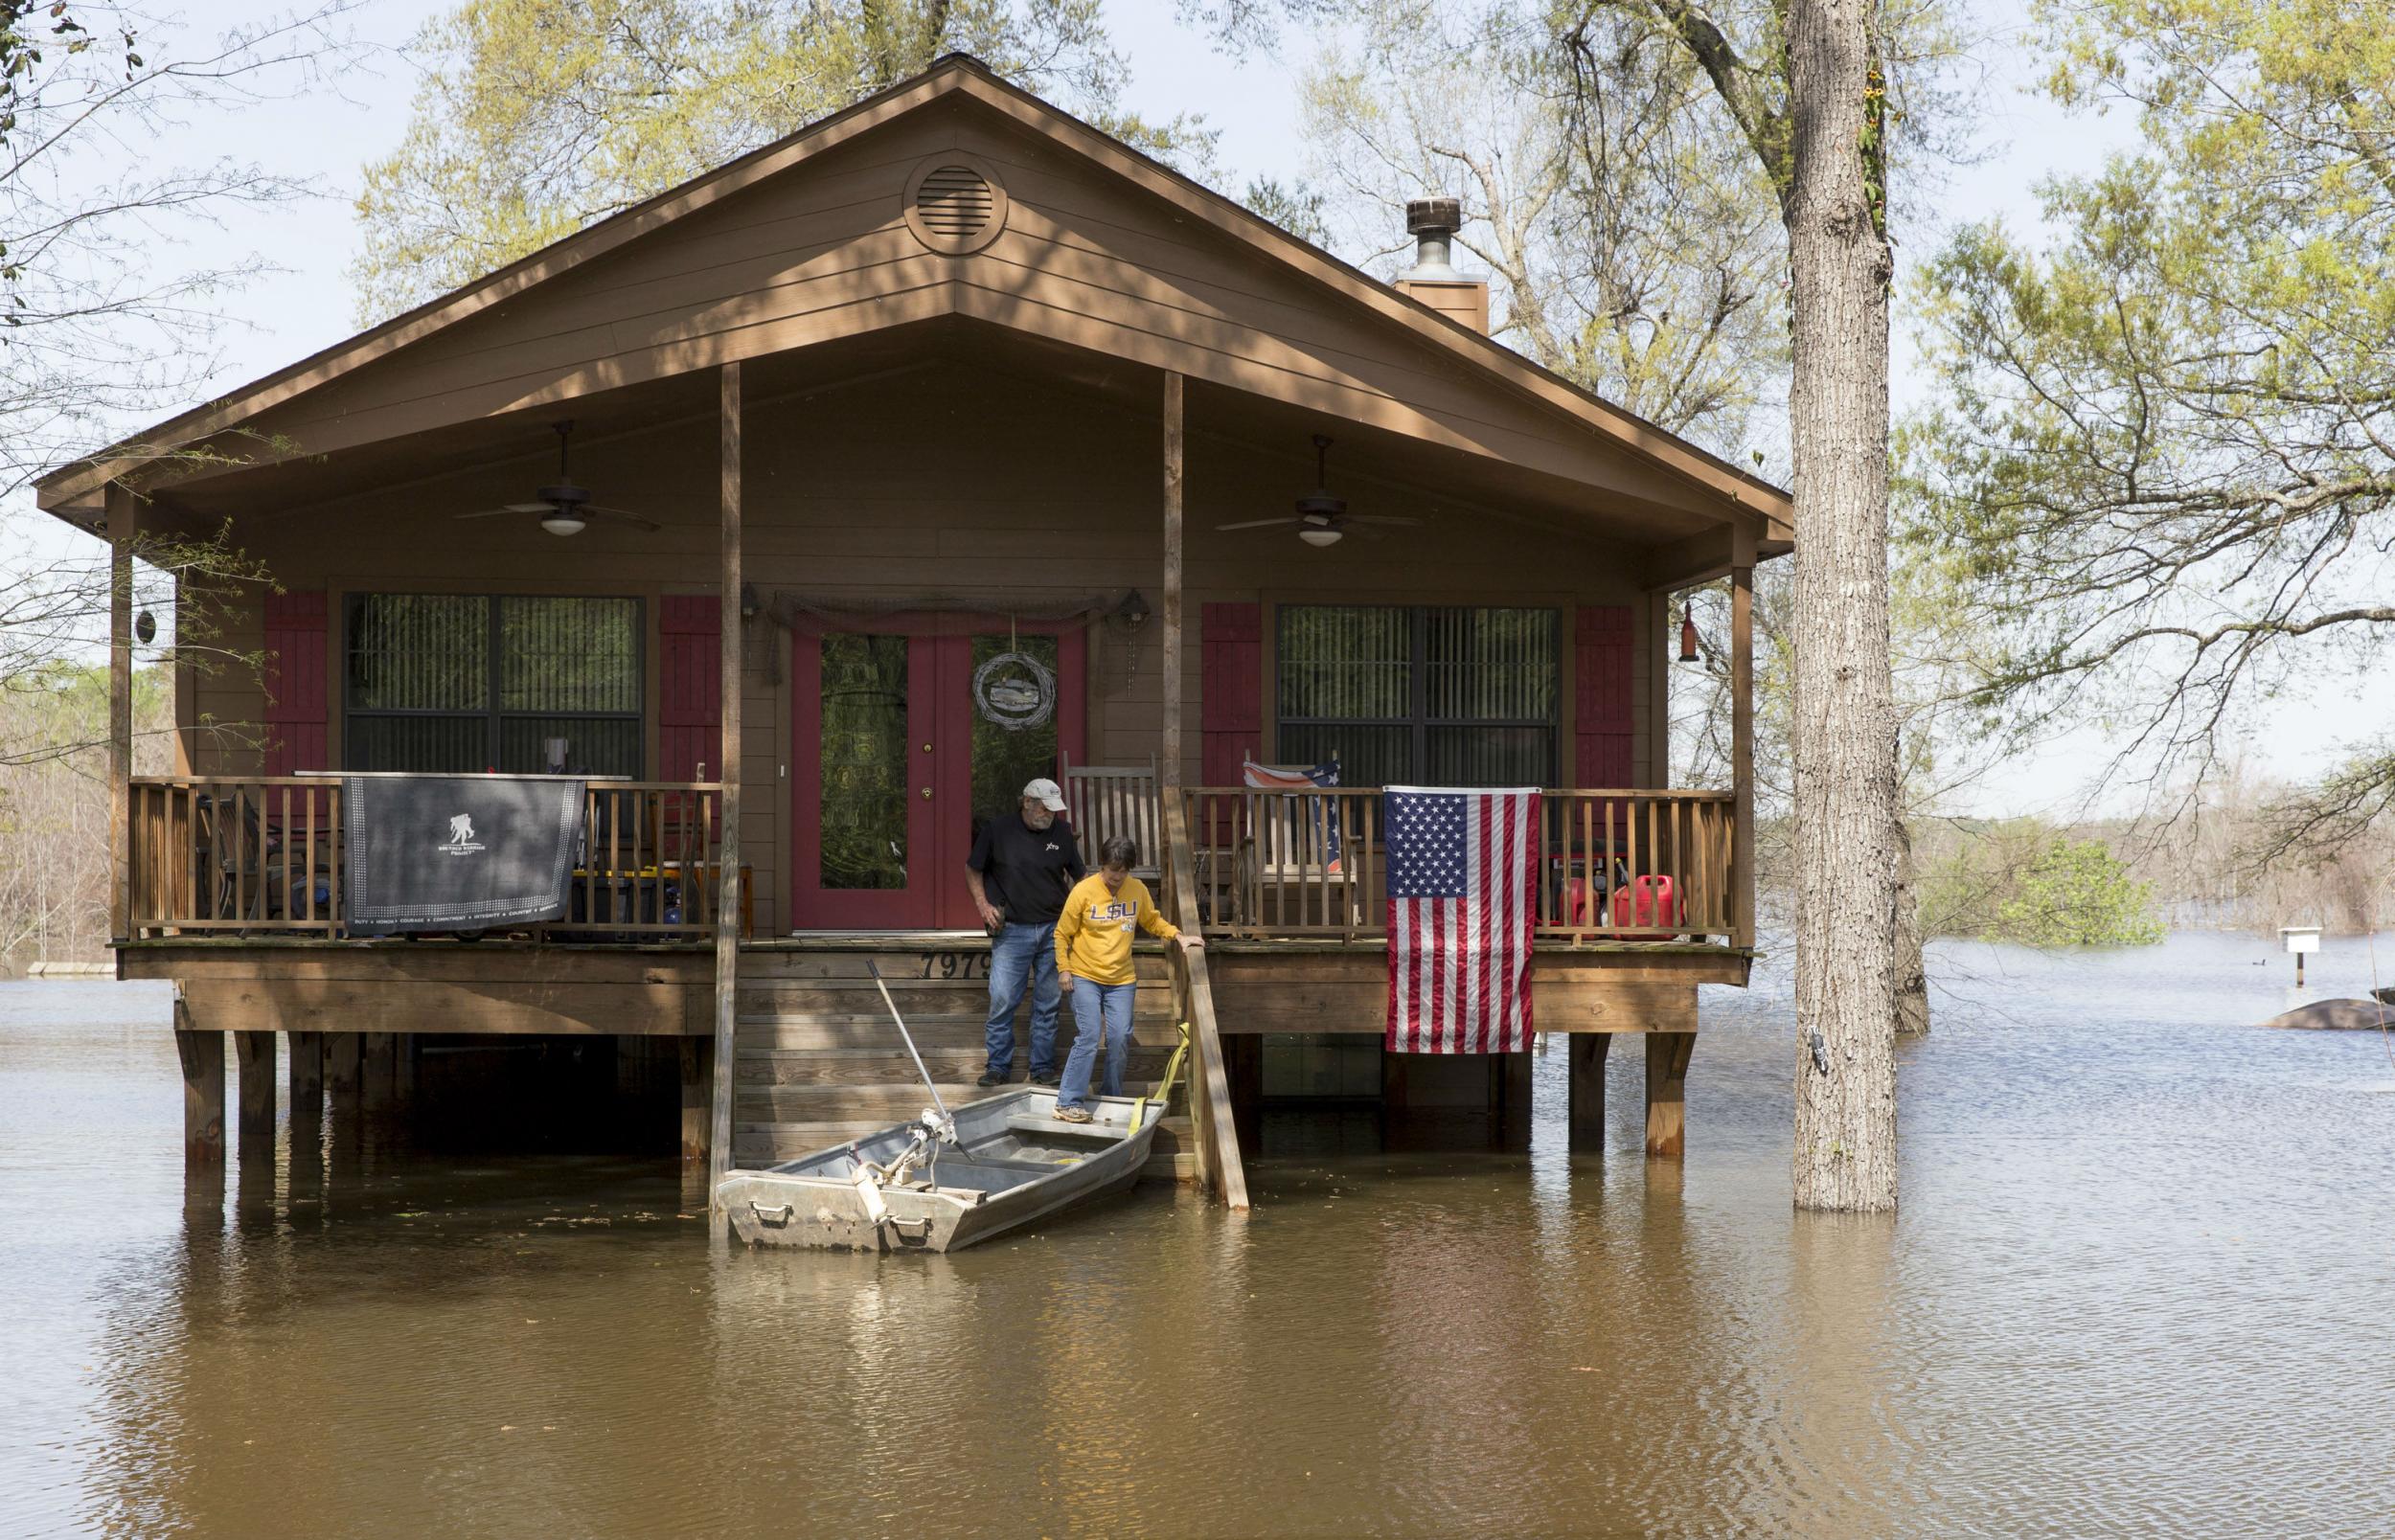 The federal government has declared a state of disaster in parts of Louisiana